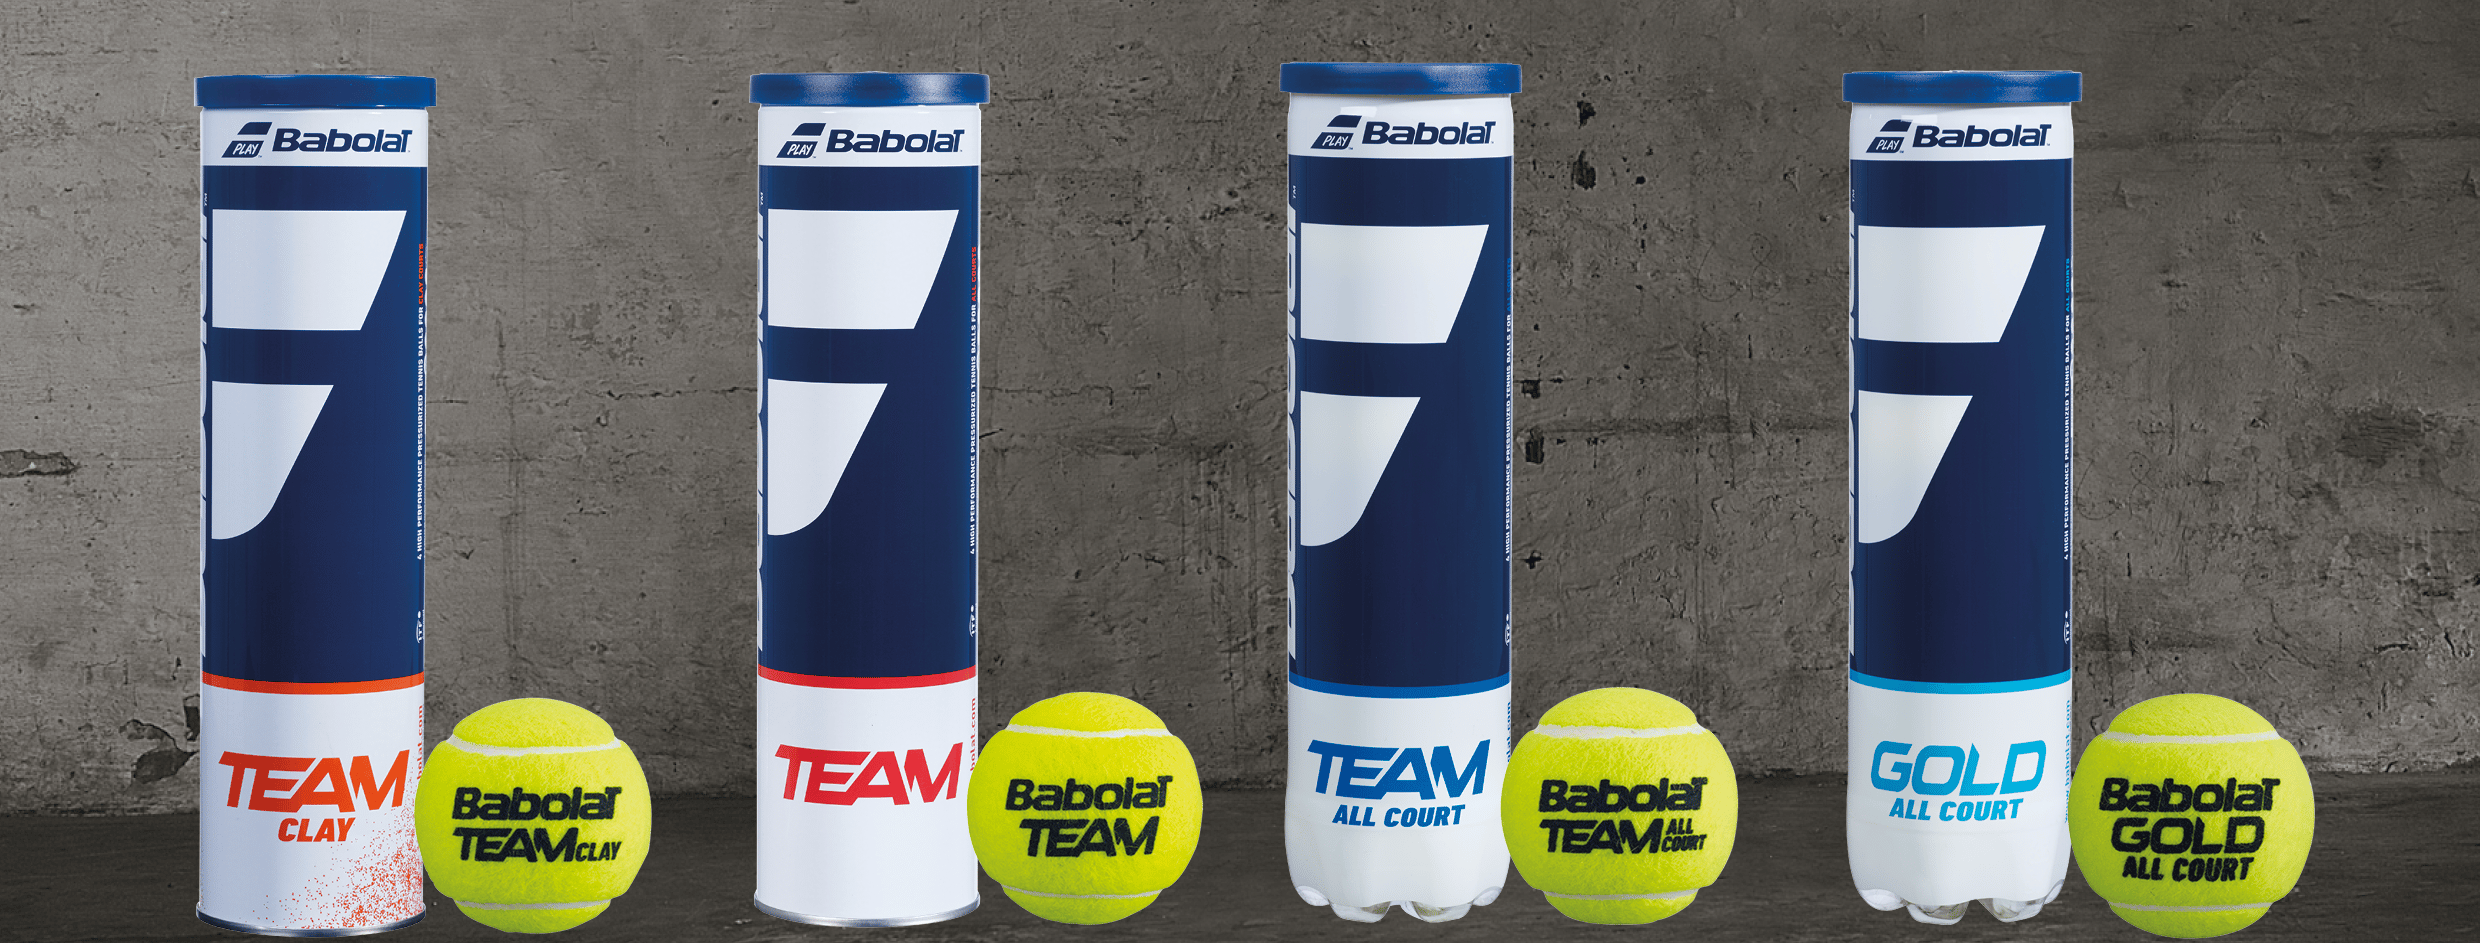 Babolat Ball Offer for Wiltshire Venues